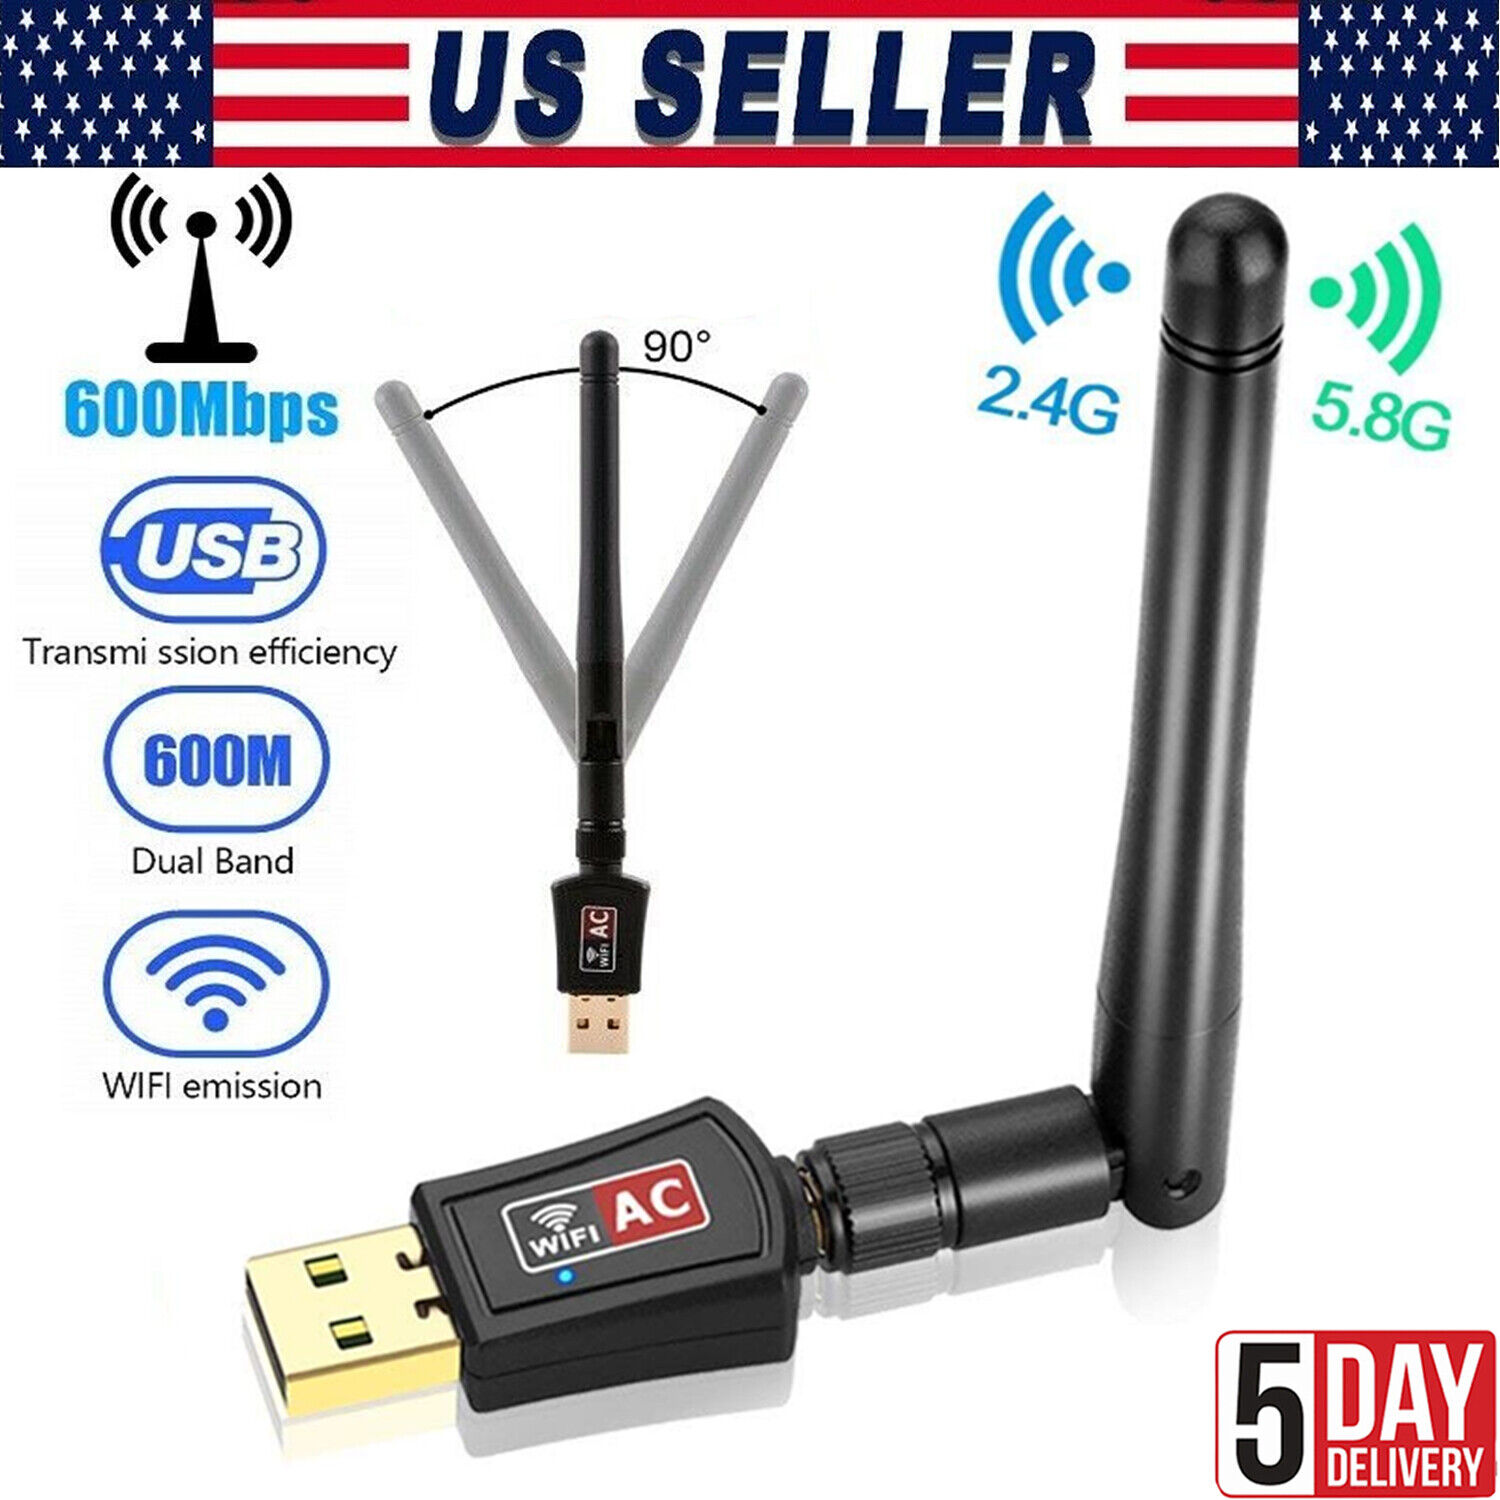 USB WiFi Adapter Network 300Mbps PC with Antenna Internet Dongle | Inox Wind